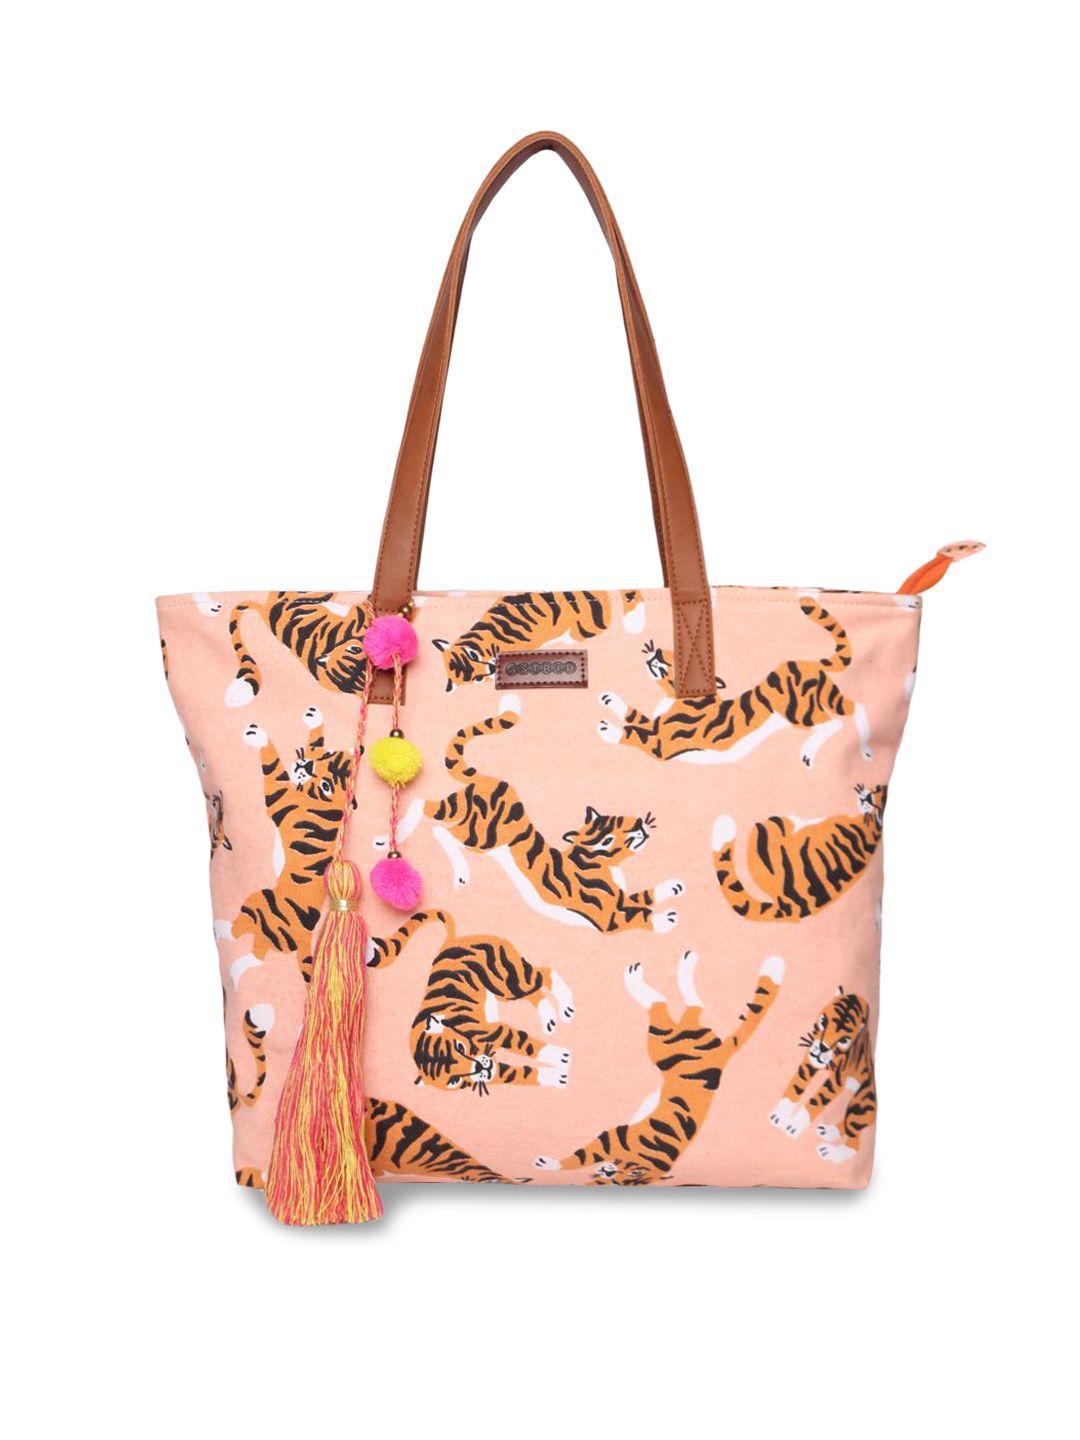 astrid printed oversized shopper tote bag with tasselled